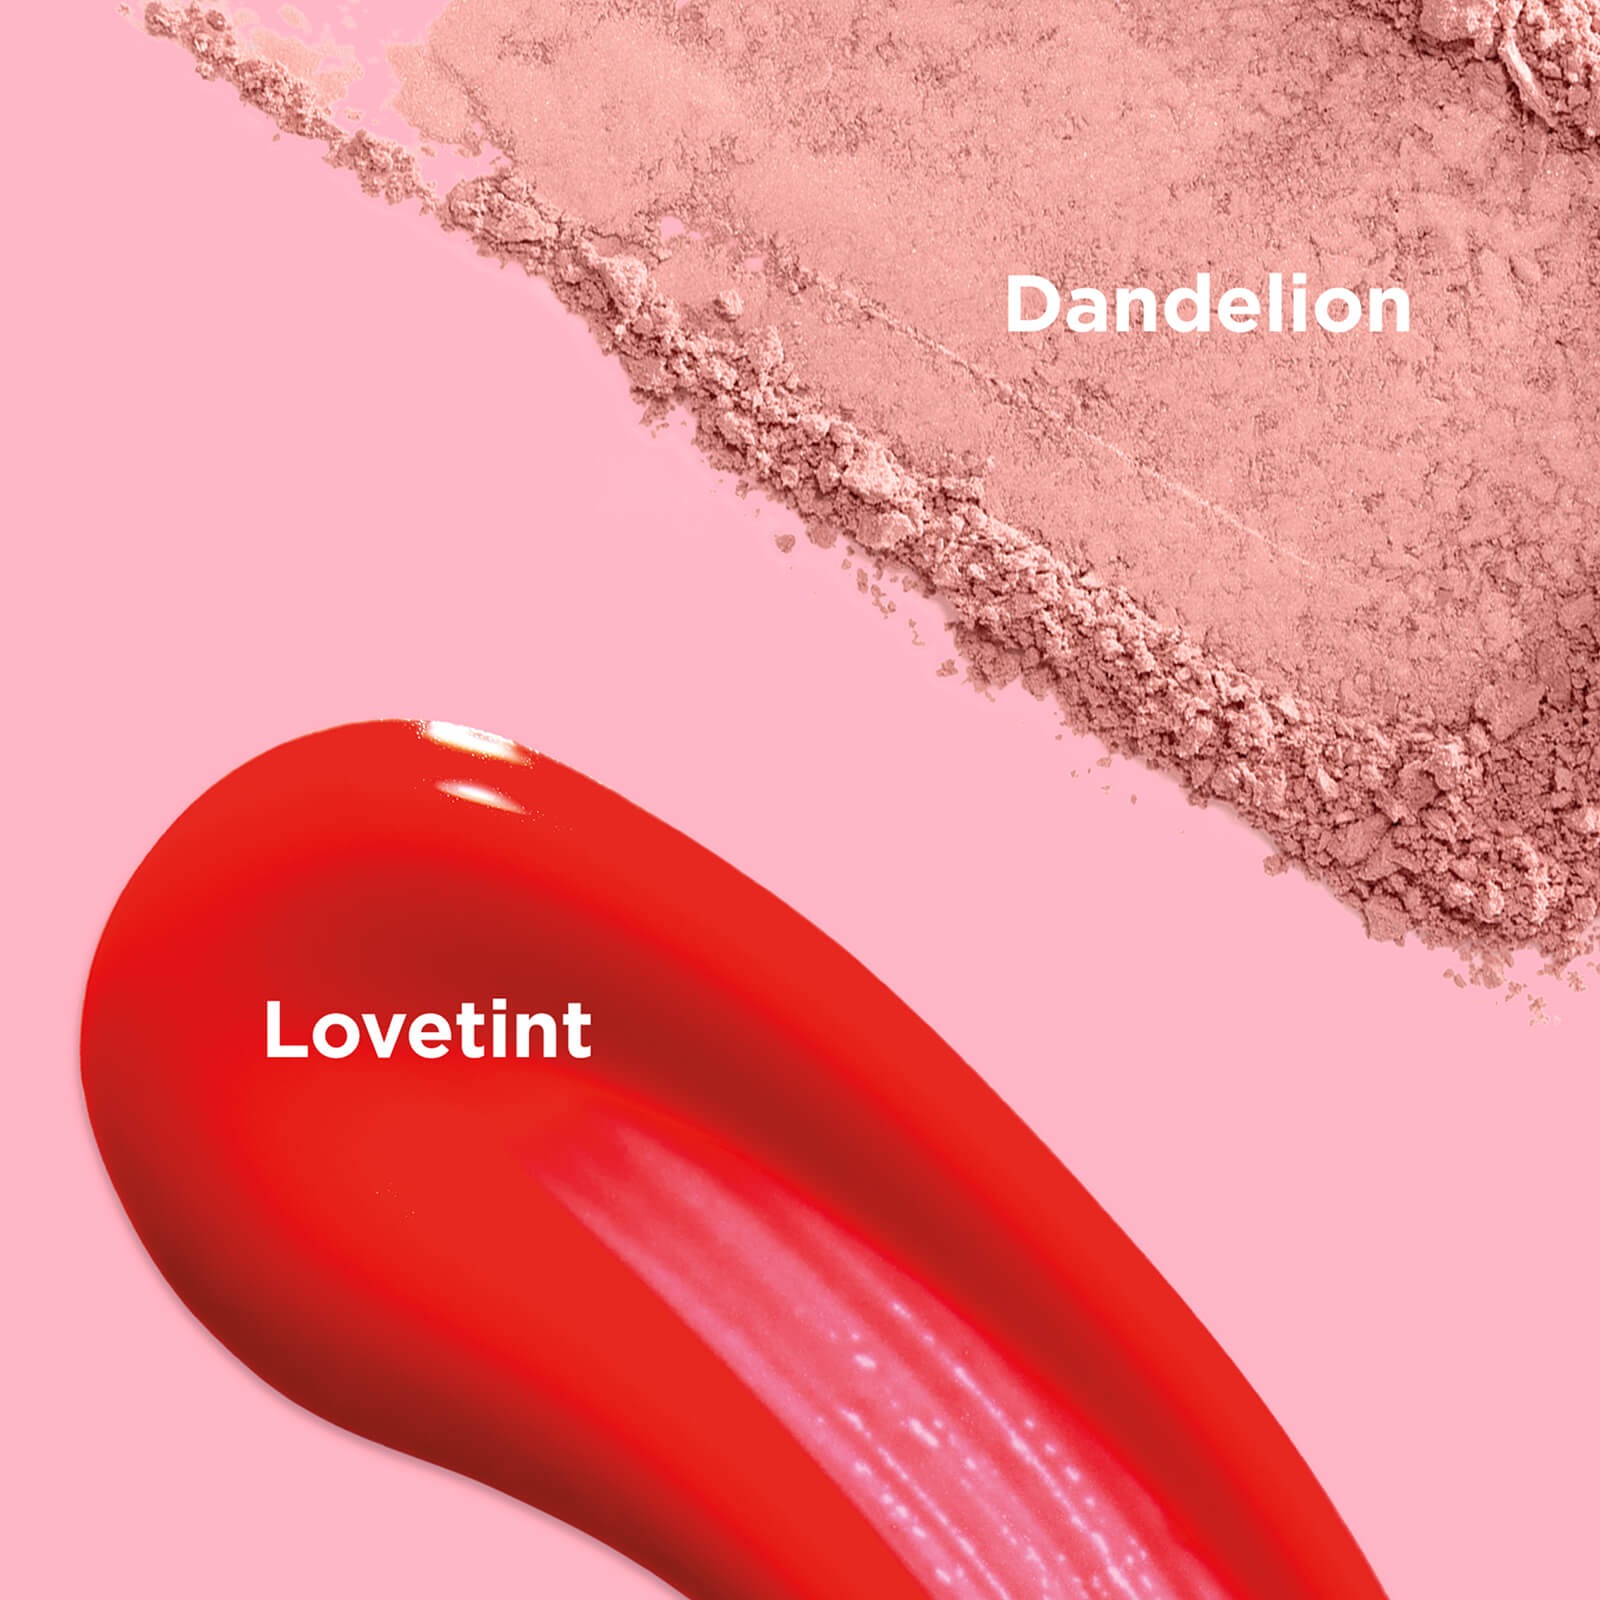 Brightening Blusher and Lip and Cheek Tint Duo swatches